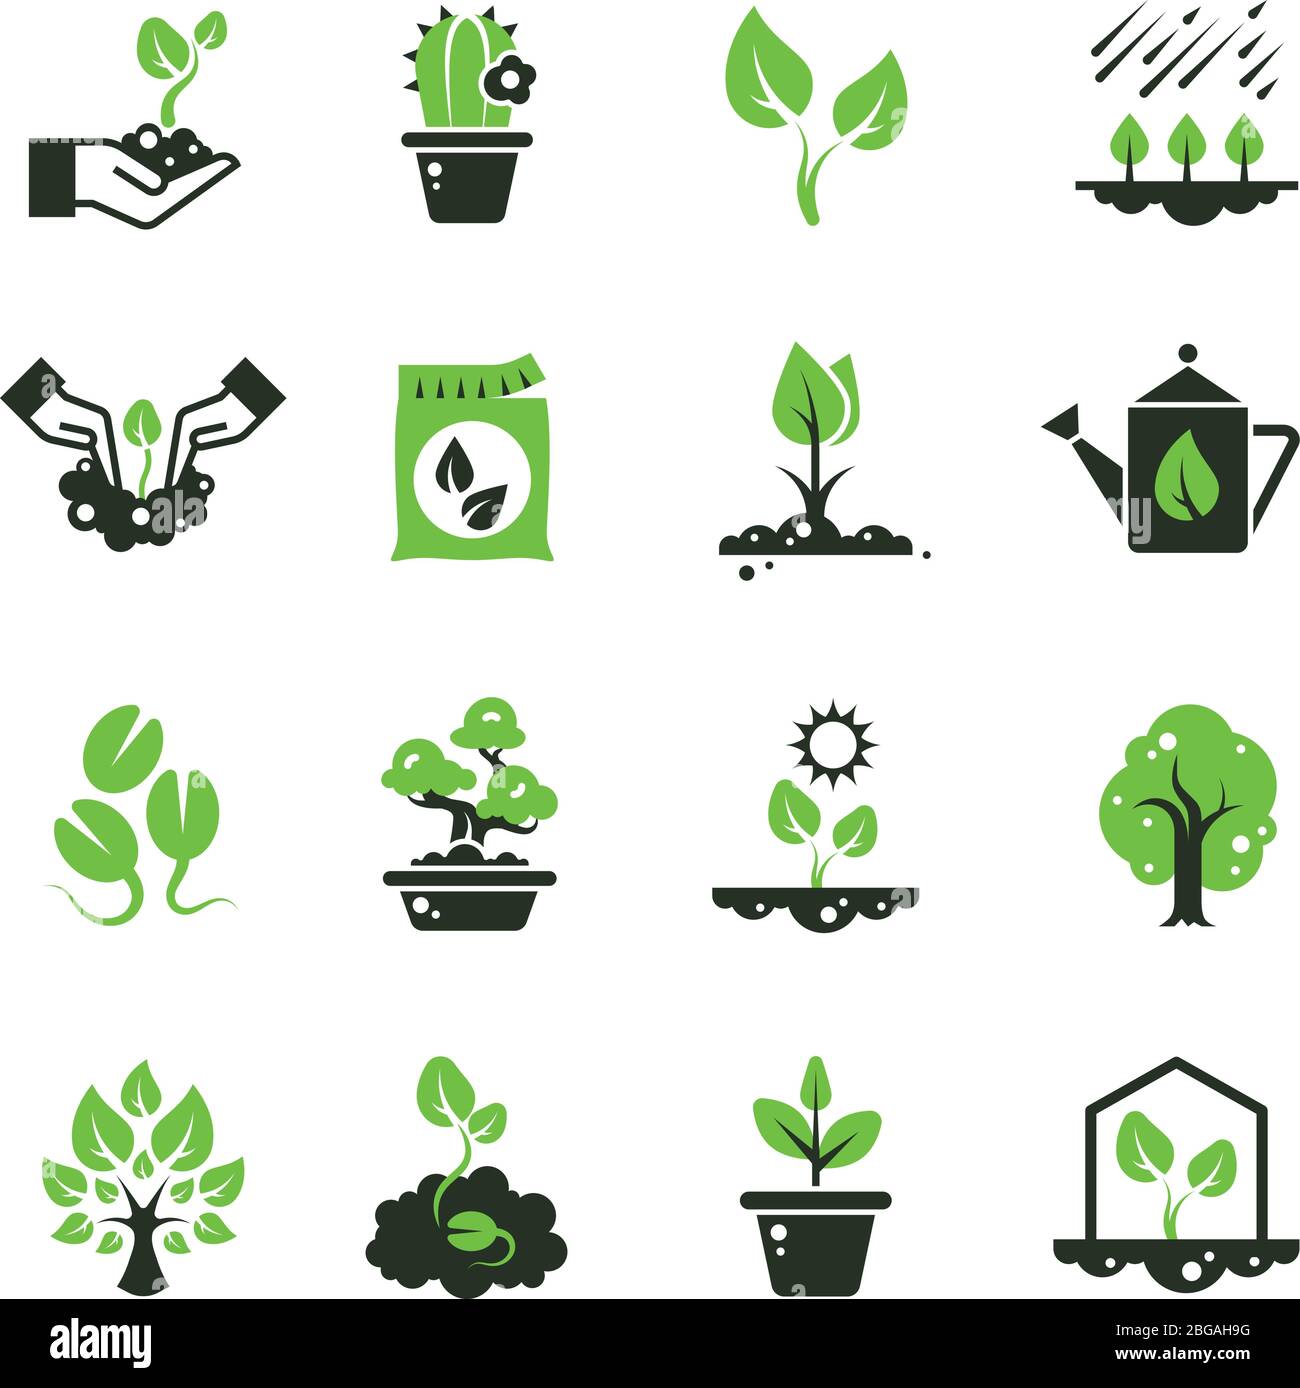 Tree sprout and plants vector icons. Seedling and hand planting pictograms. Seedling and growth tree, gardening and growing illustration Stock Vector